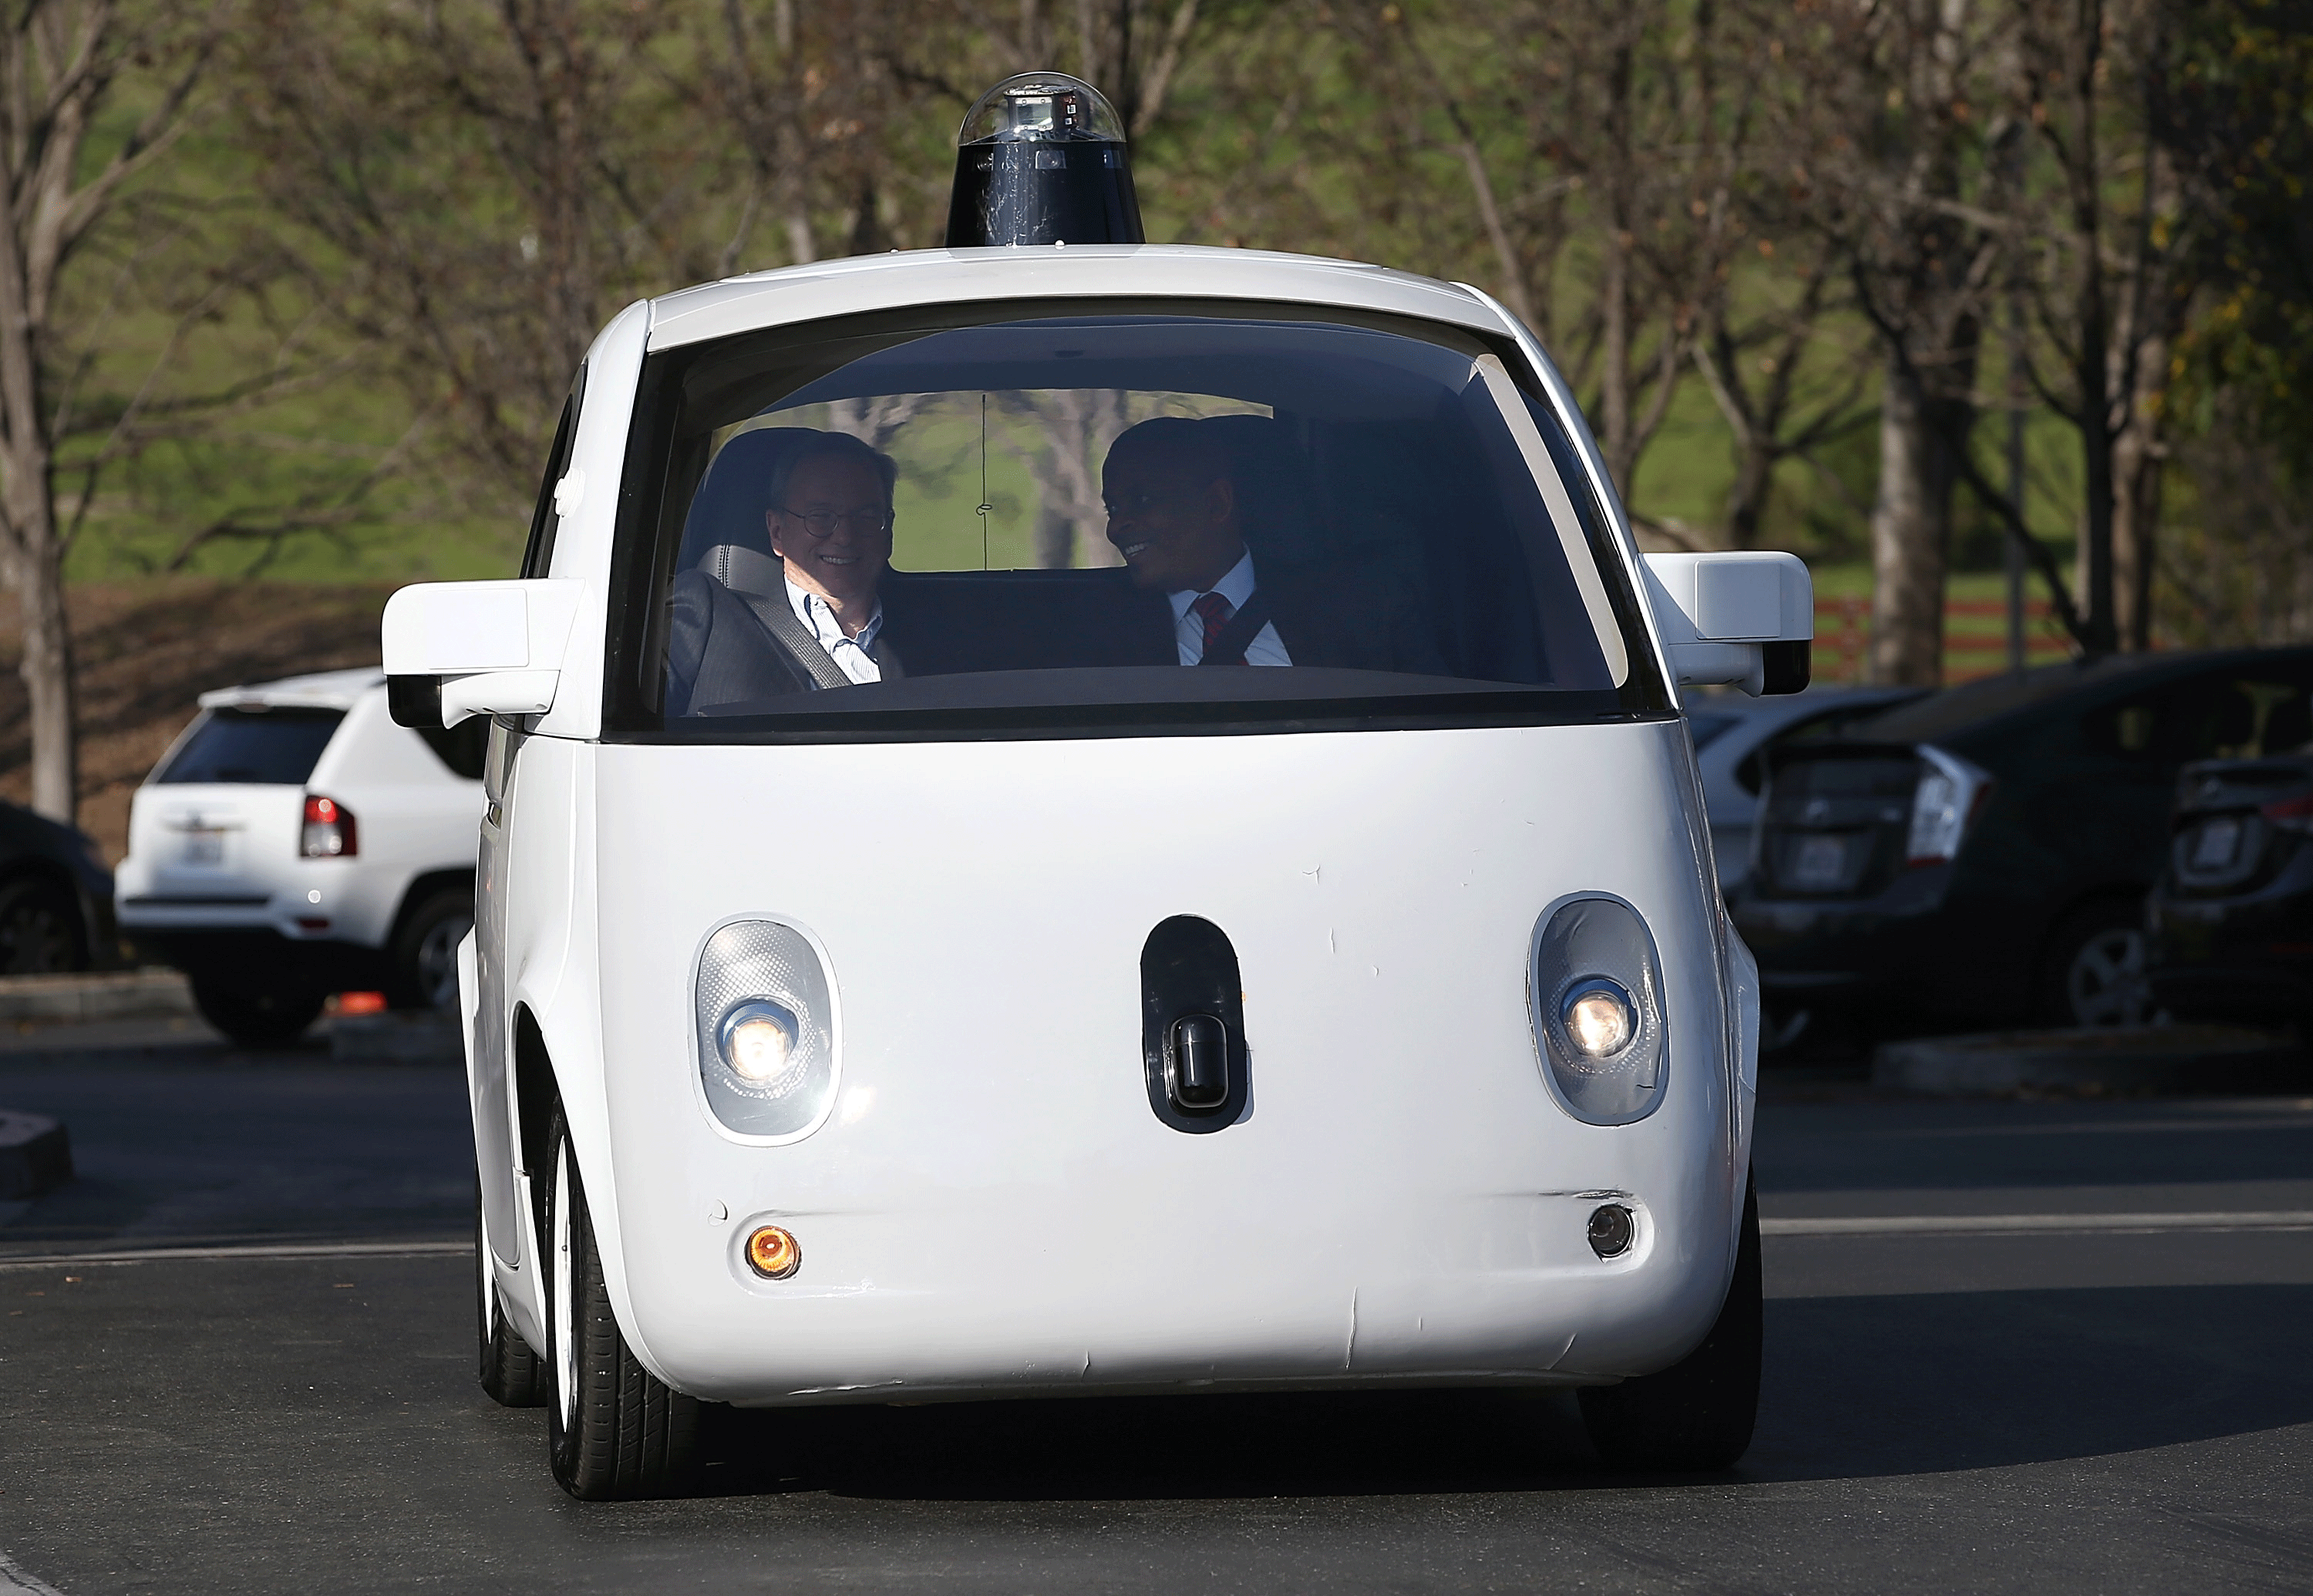 MOUNTAIN VIEW, CA - FEBRUARY 02: U.S. Transportation Secretary Anthony Foxx (R) and Google Chairman Eric Schmidt (L) ride in a Google self-driving car at the Google headquarters on February 2, 2015 in Mountain View, California. U.S. Transportation Secreta